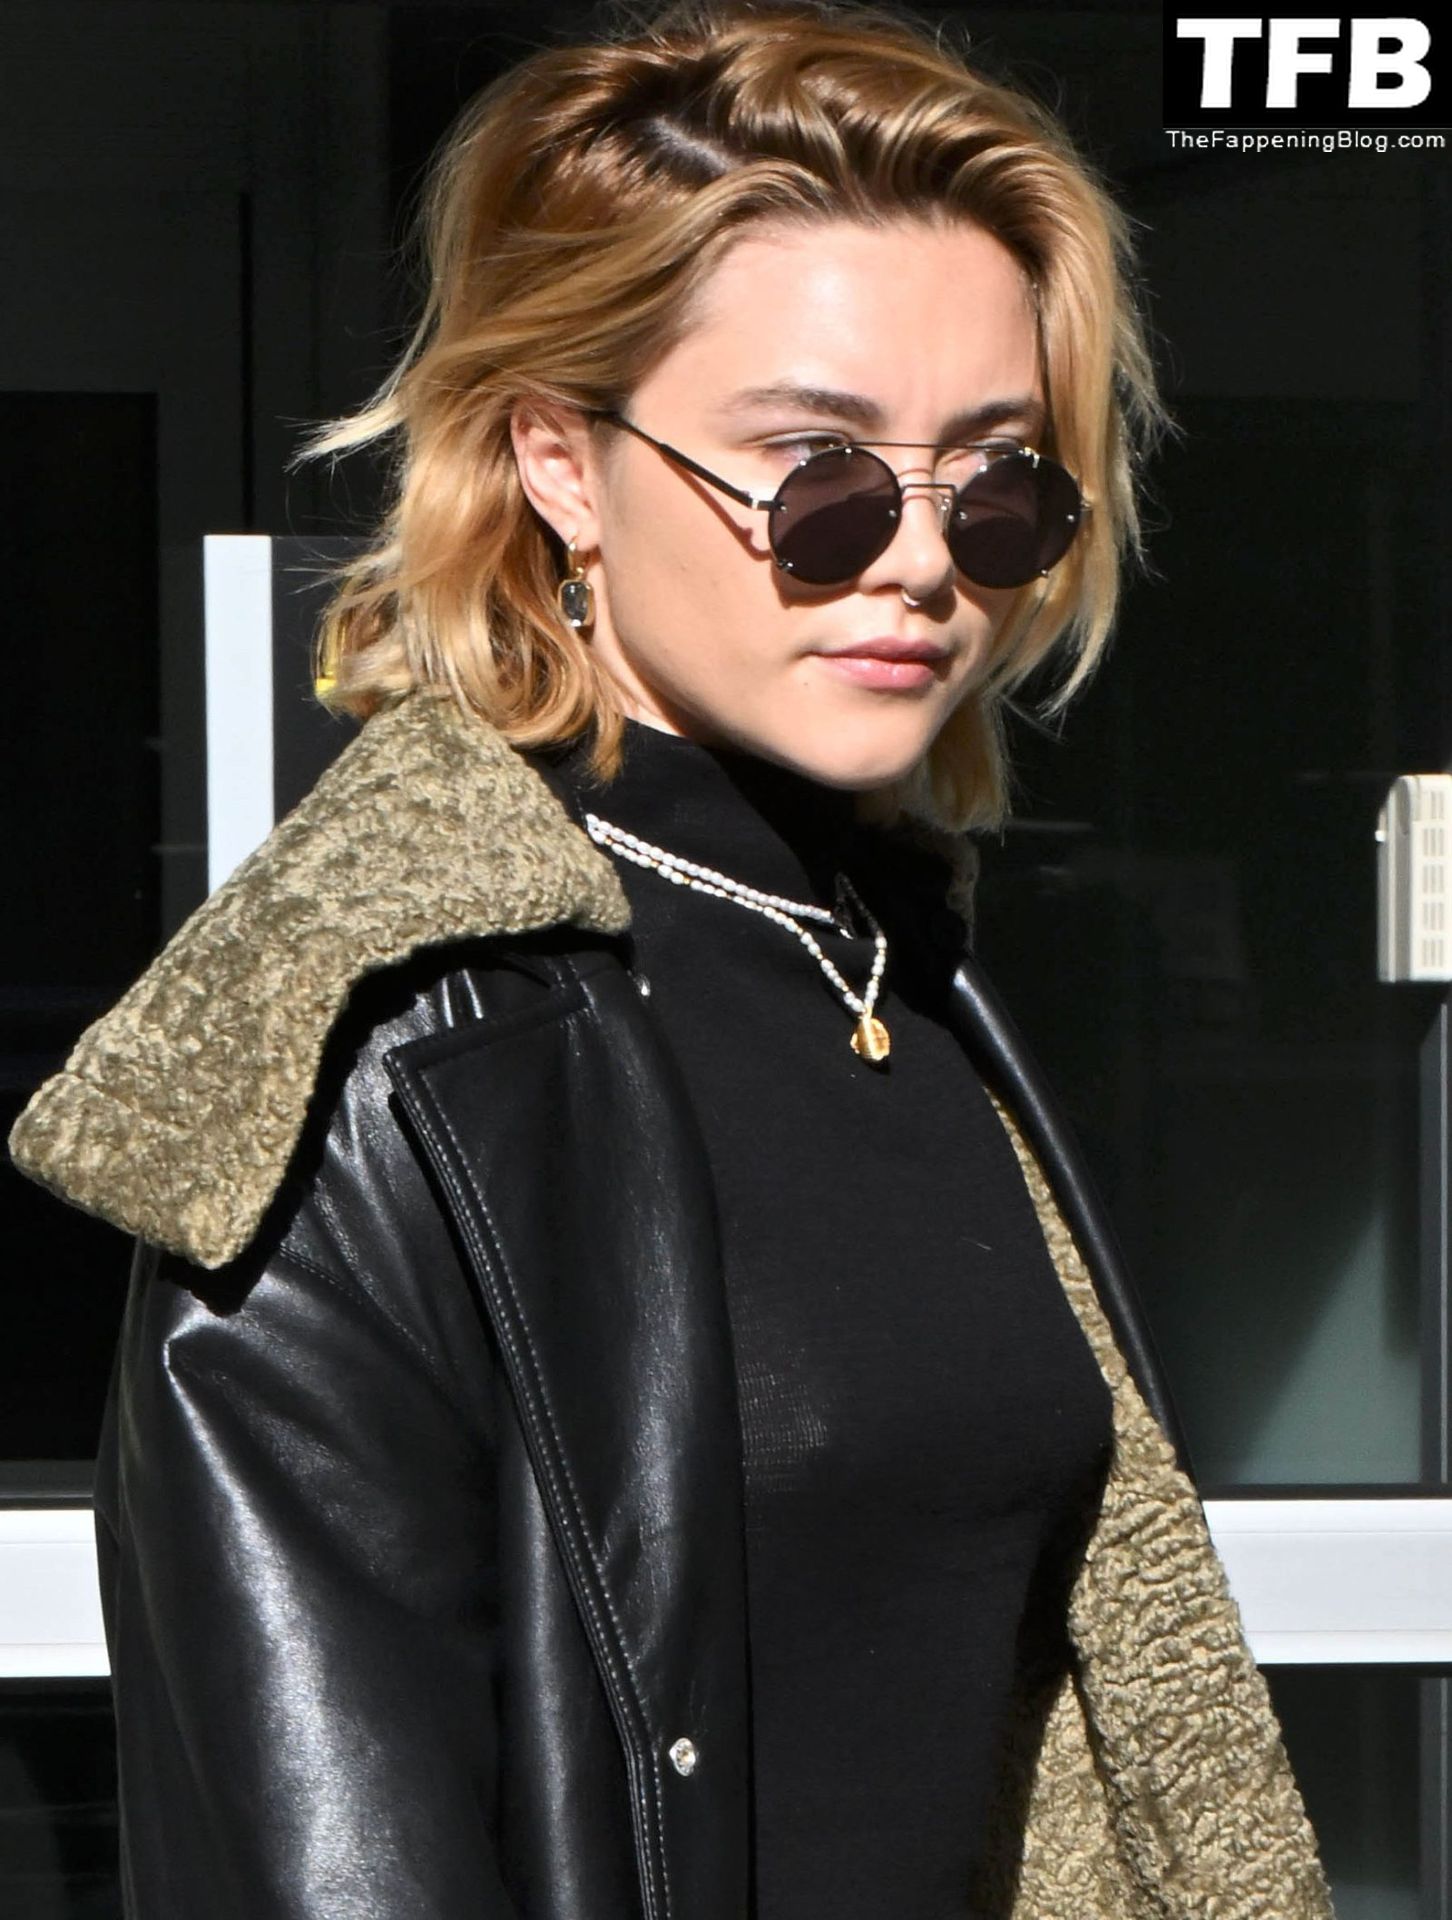 Florence Pugh Pokies The Fappening Blog 25 - Florence Pugh Shows Off Her Pokies at JFK airport in NYC (31 Photos)